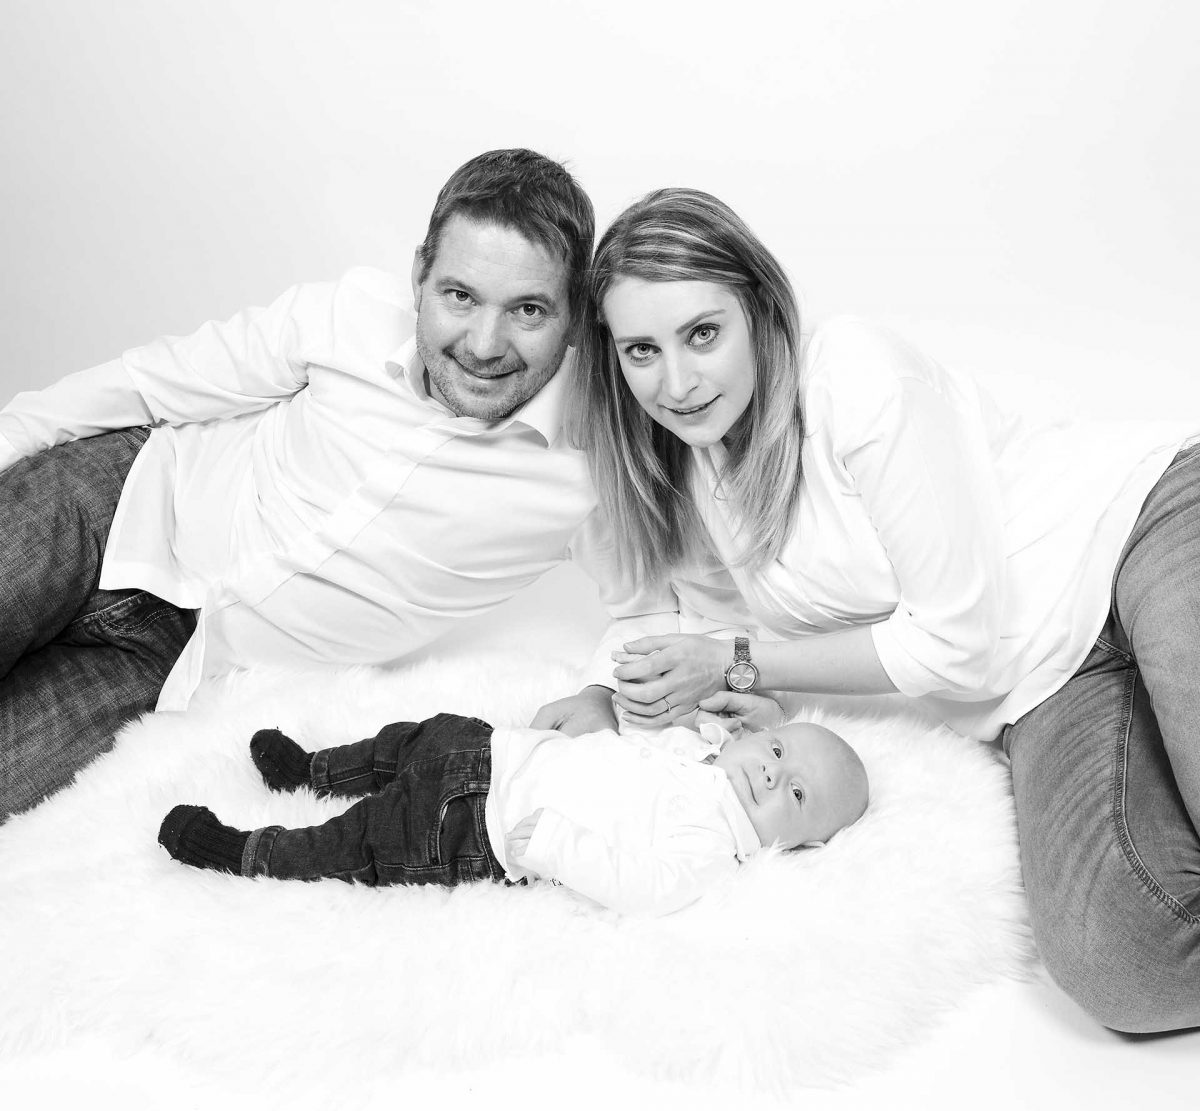 baby-shooting-familienalbum-fotograf-tegernsee-schliersee-andreas-leder